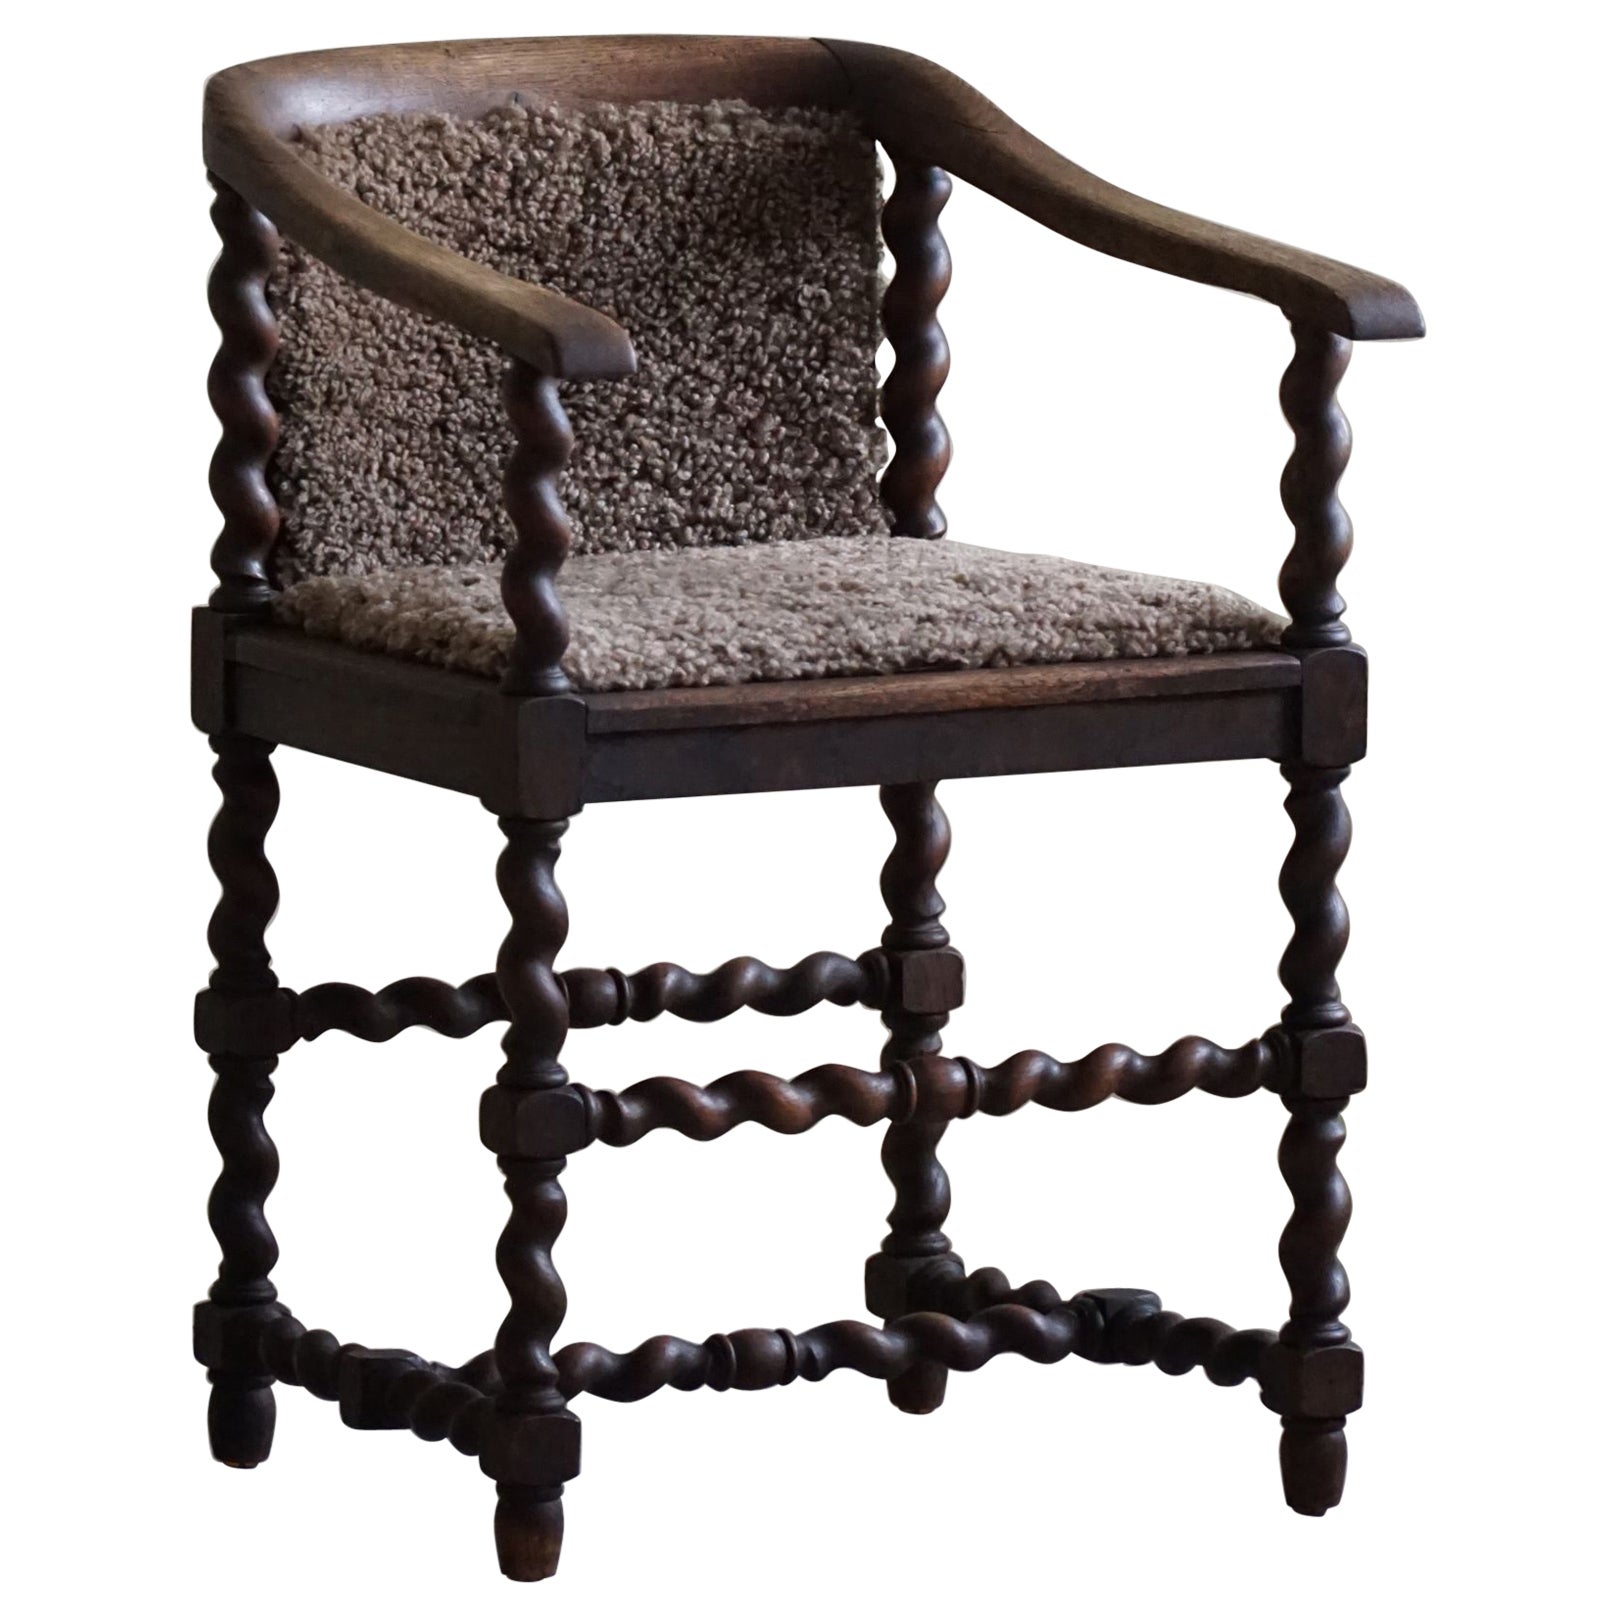 Antique French Armchair, Barley Twisted, Reupholstered in Lambswool, 19th C